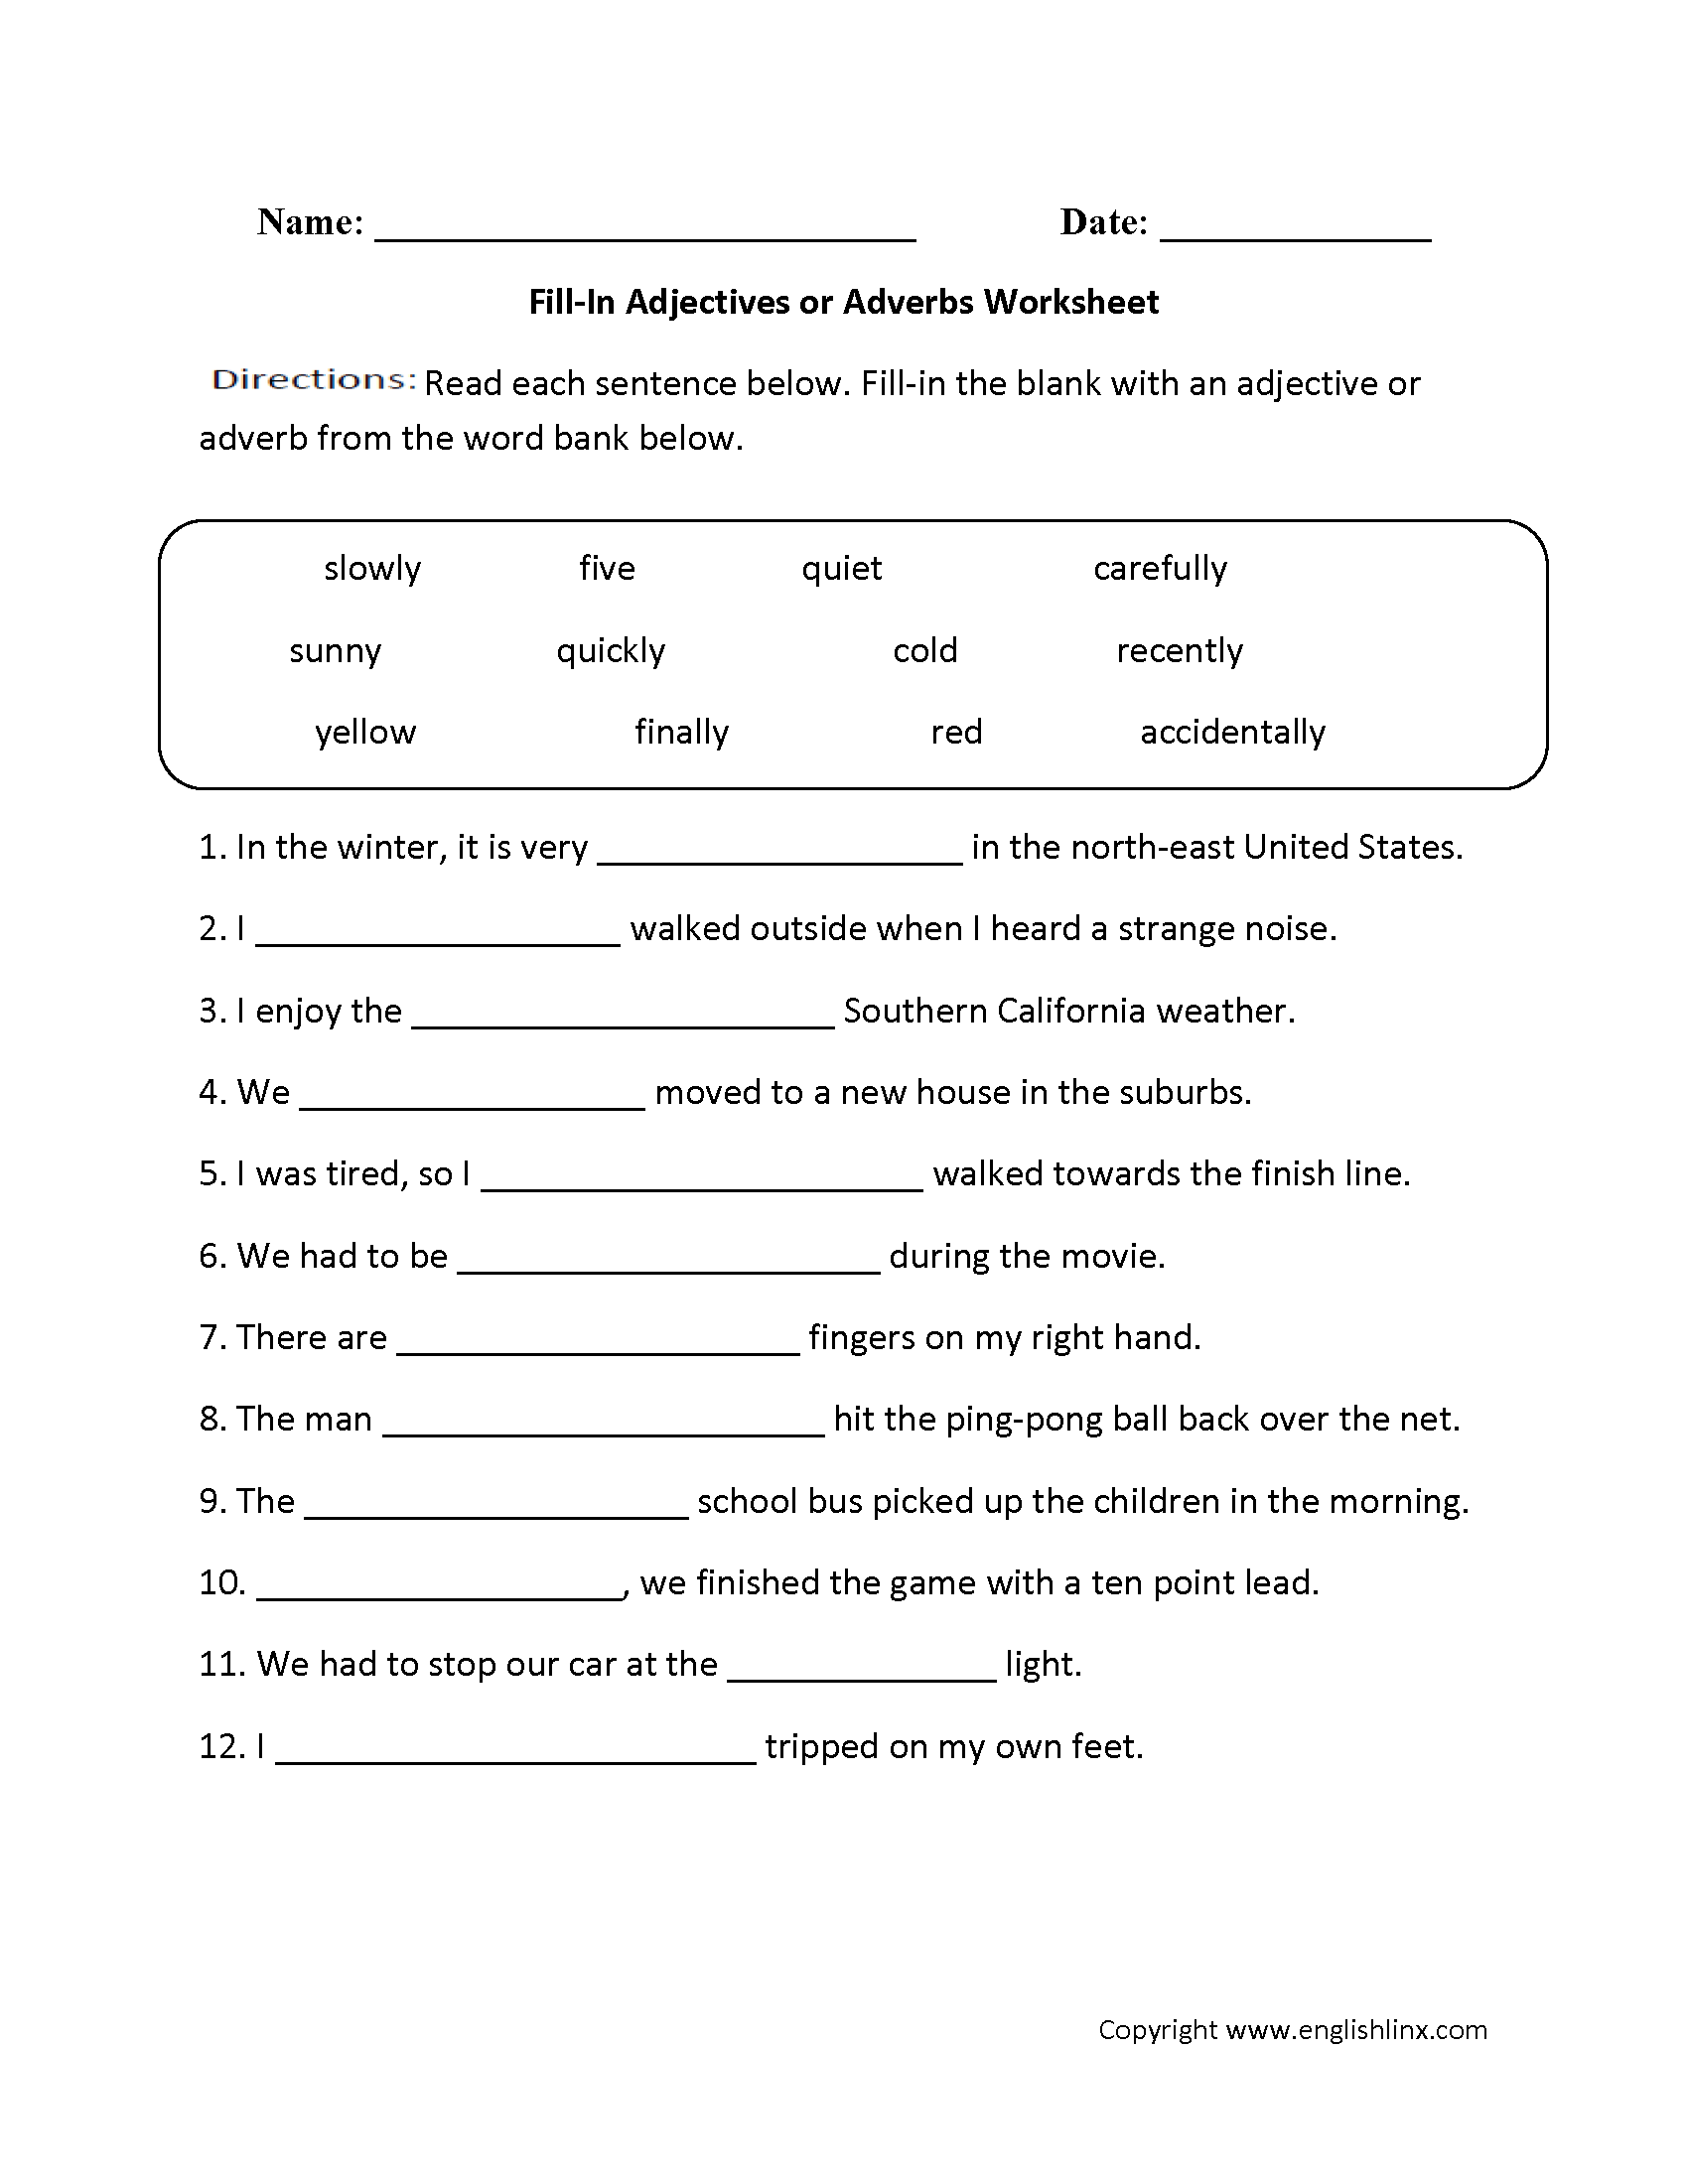 Adjectives Or Adverbs Worksheets Fill In Adjectives Or Adverbs Worksheet